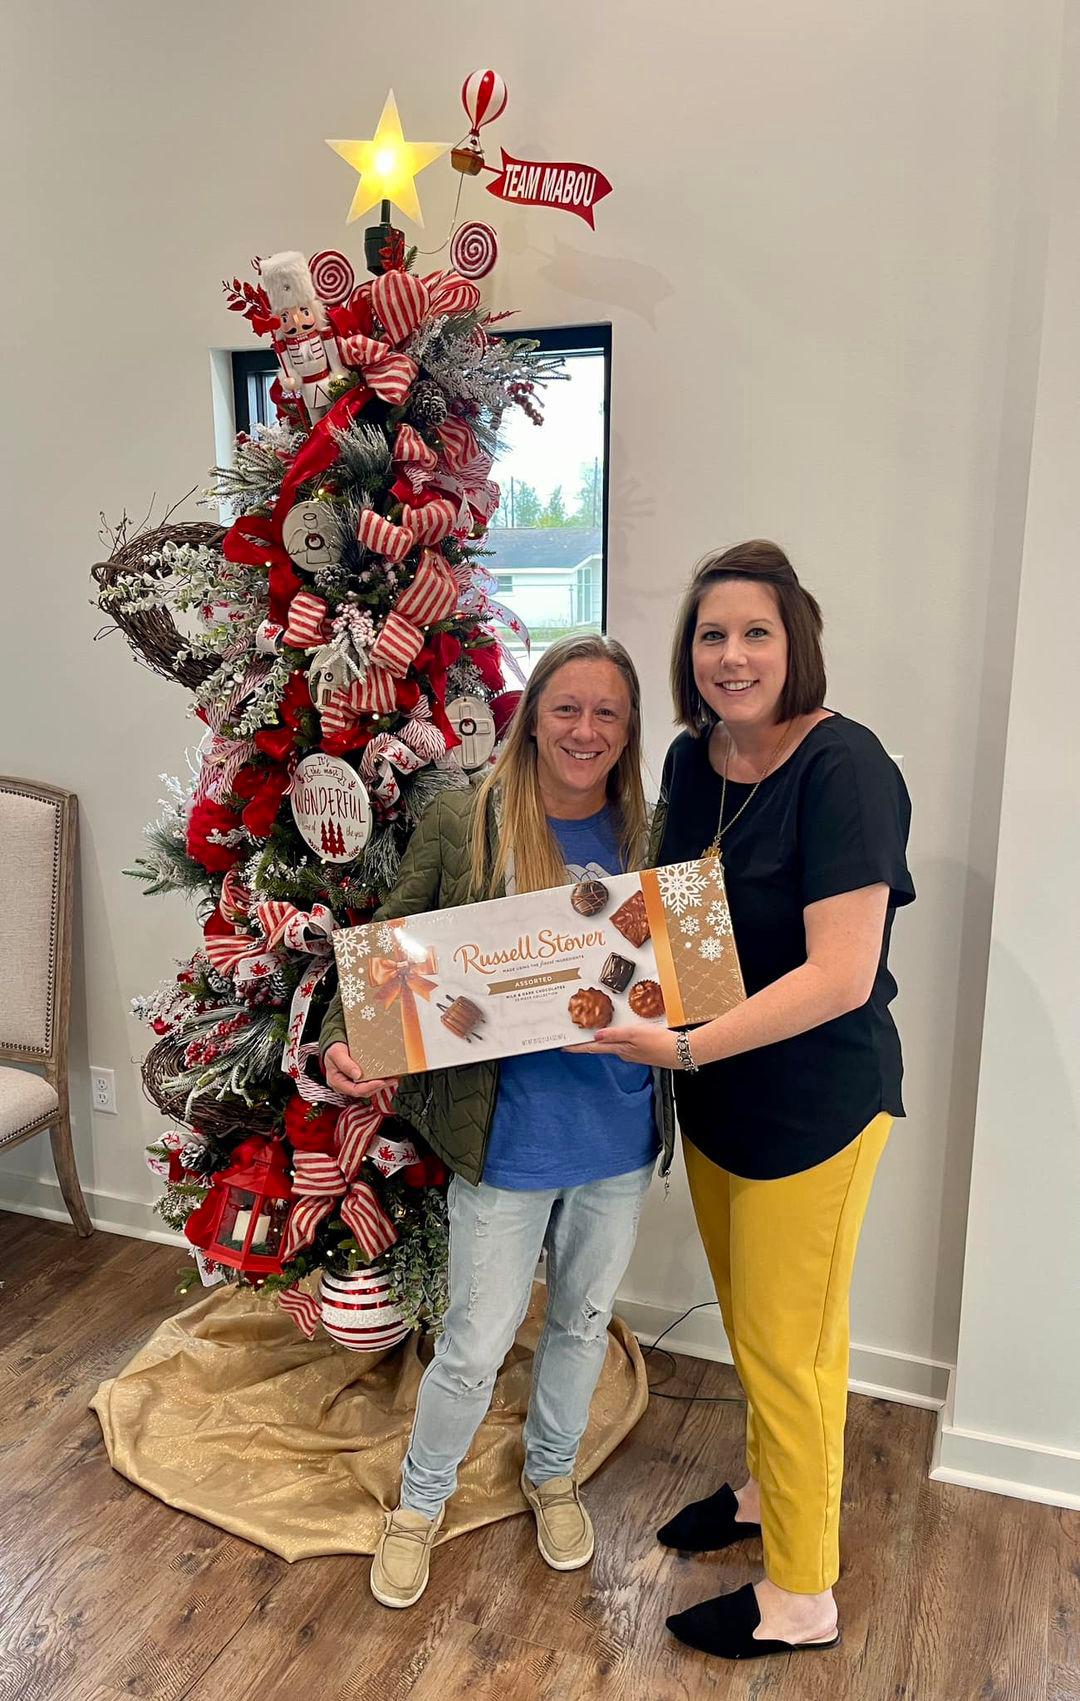 We really do have the sweetest customers!! Thank you to the Link Family for thinking of us! Jennifer Mabou - State Farm Insurance Agent Sulphur (337)527-0027